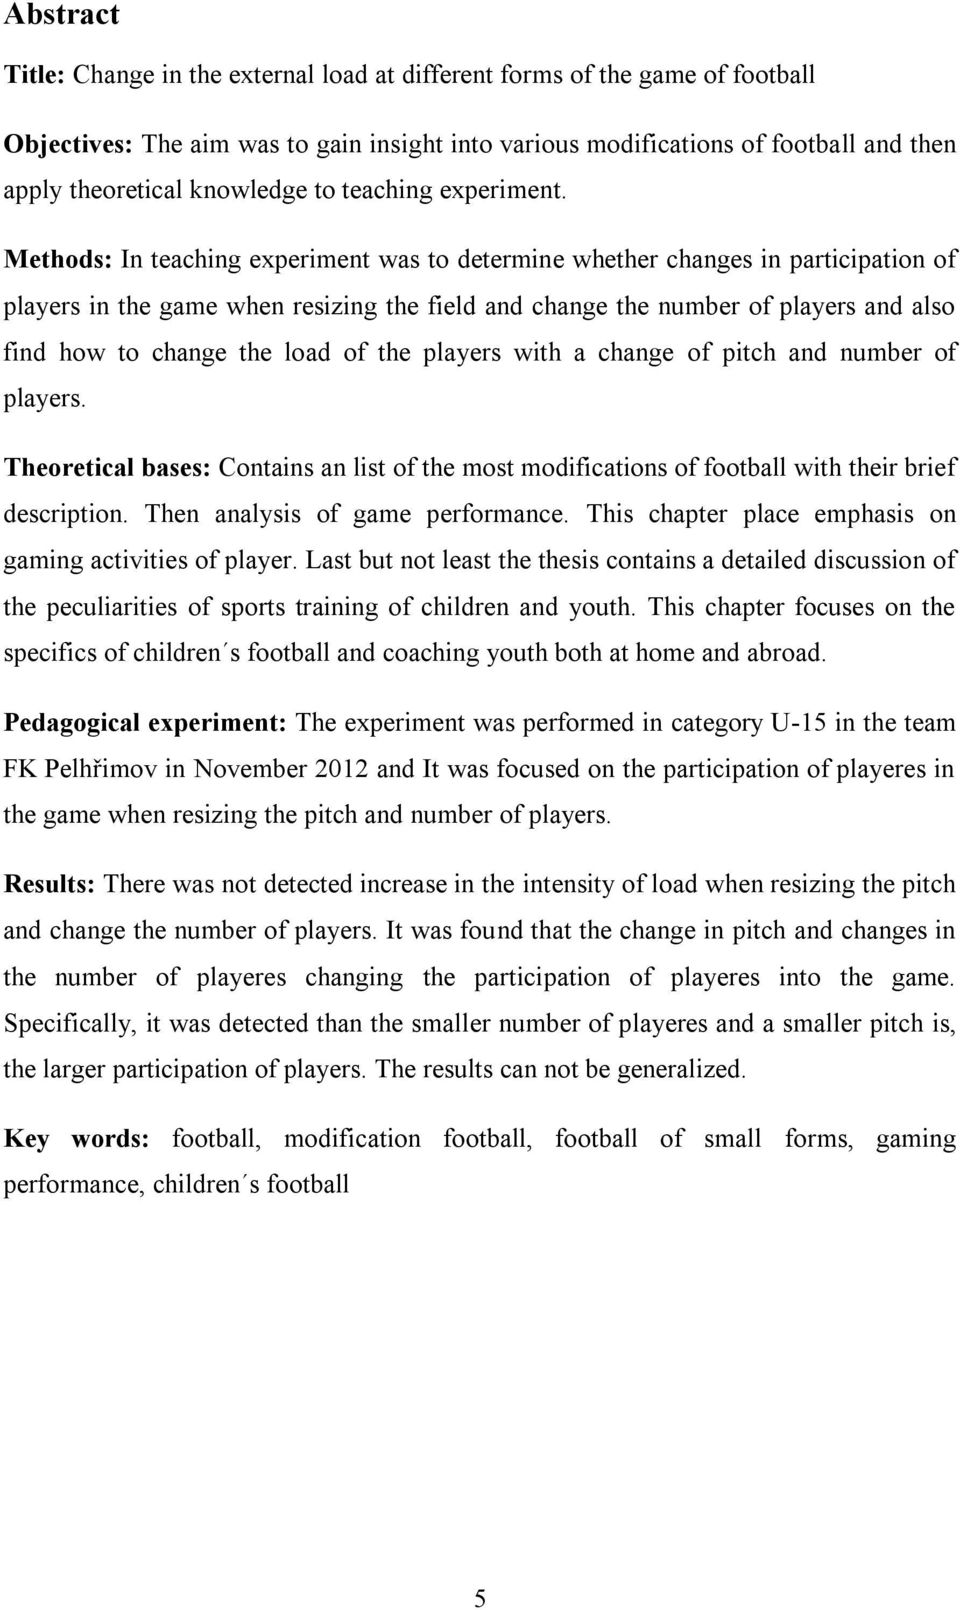 Methods: In teaching experiment was to determine whether changes in participation of players in the game when resizing the field and change the number of players and also find how to change the load